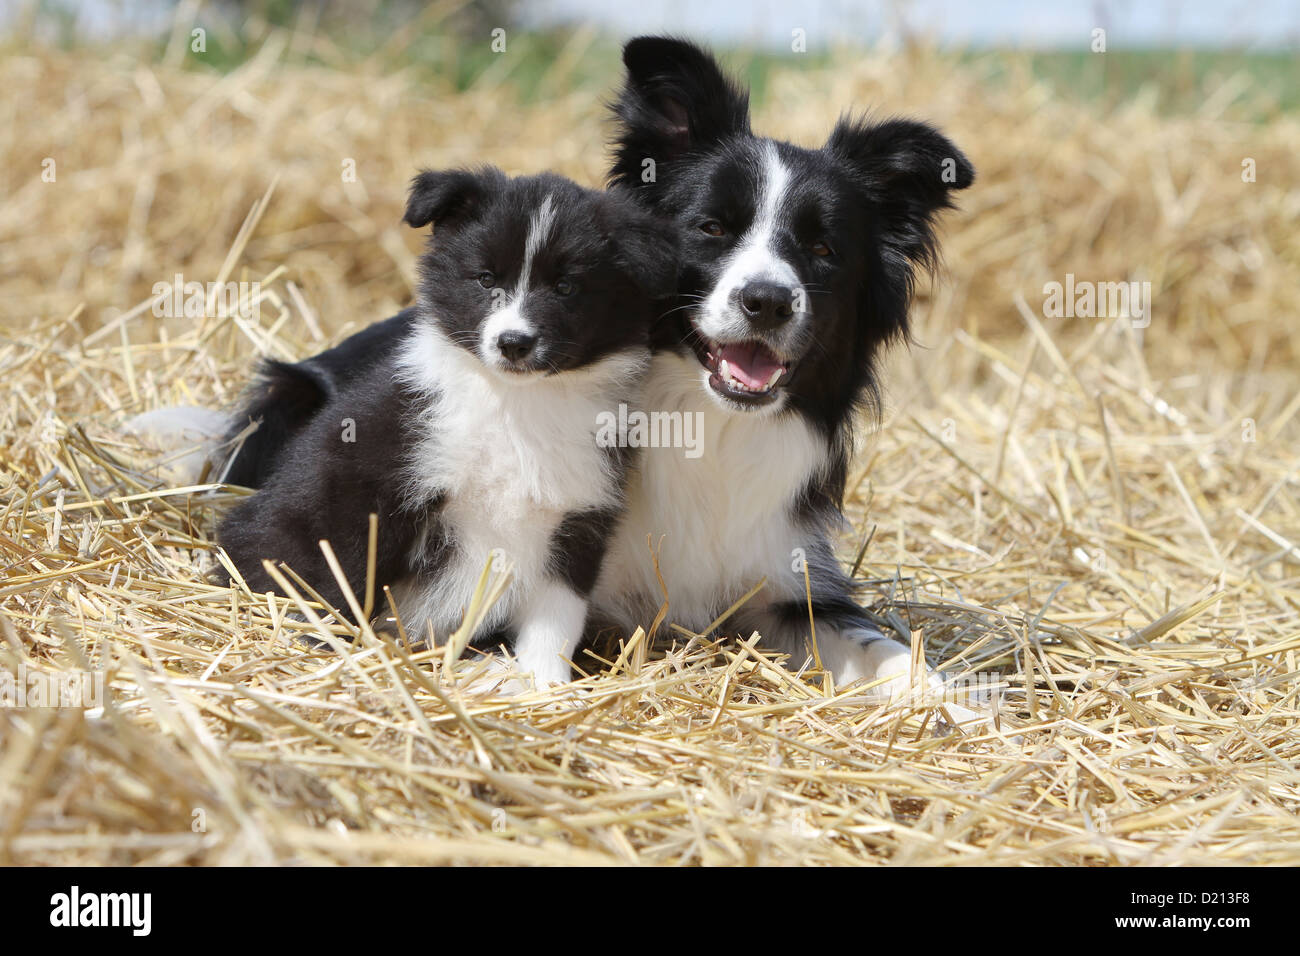 Dog Border Collie adult and puppy black and white lying in the straw Stock Photo